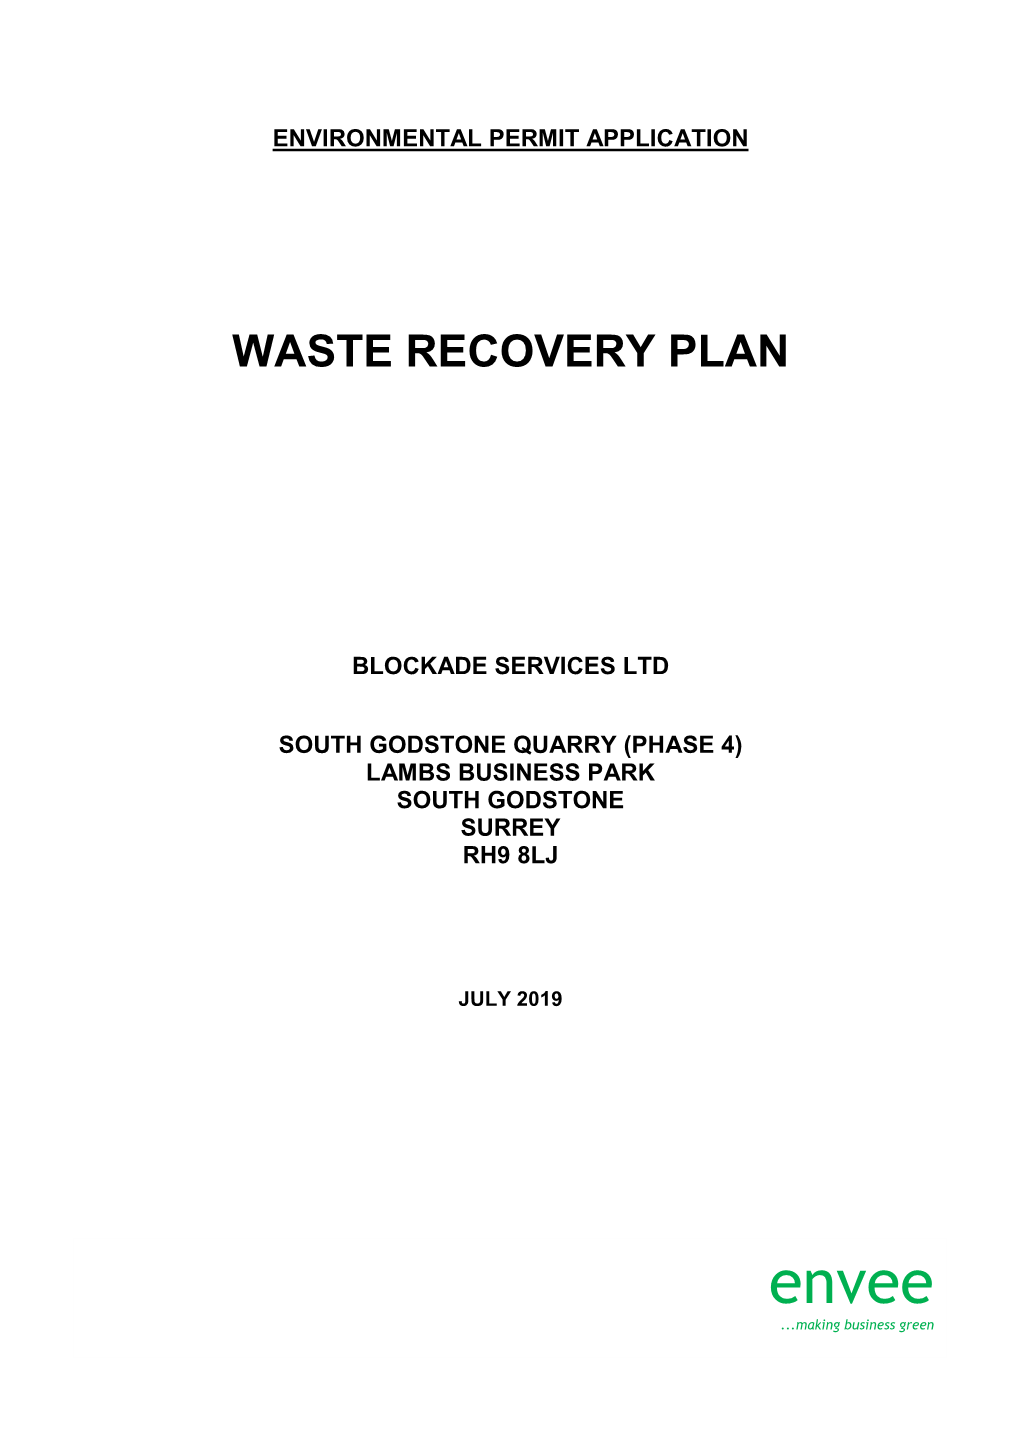 Waste Recovery Plan